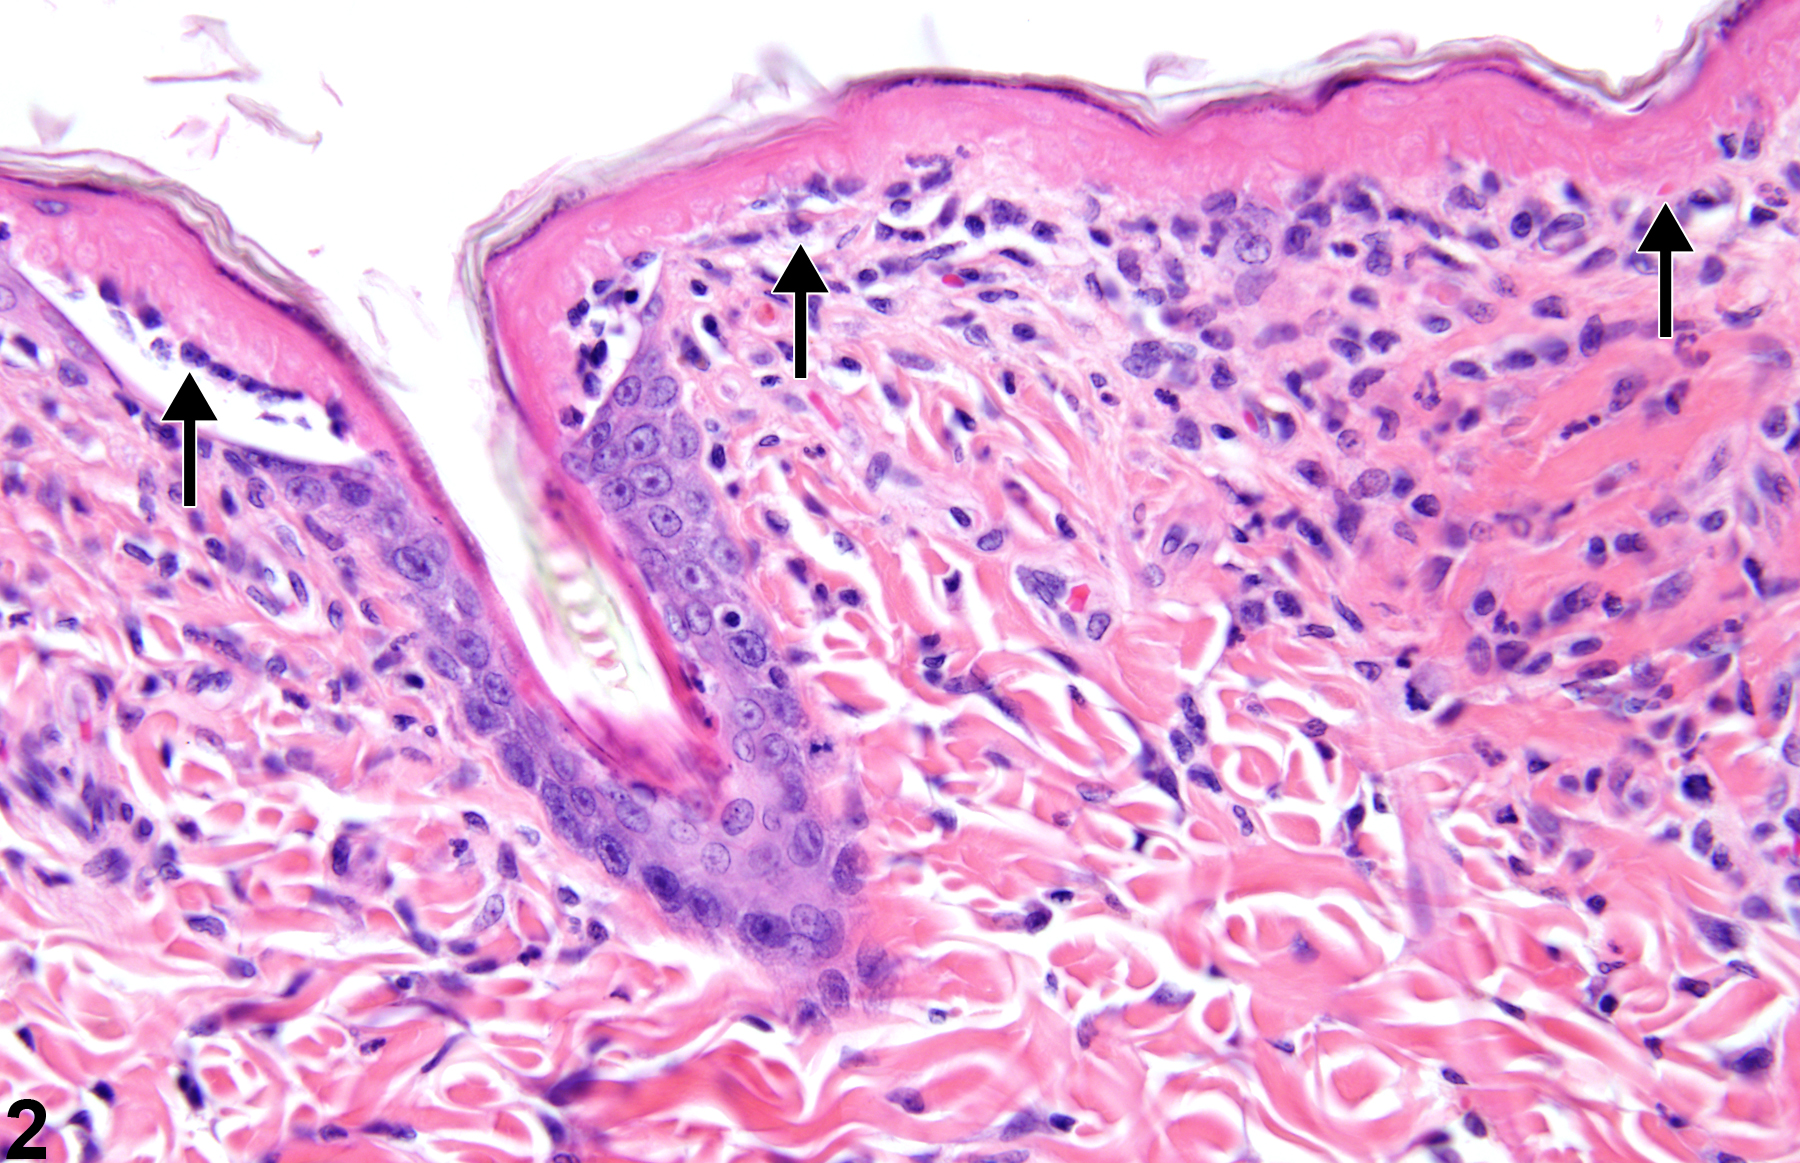 Image of Necrosis in the Skin from a Male F344/N Rat in a 90-day  Study